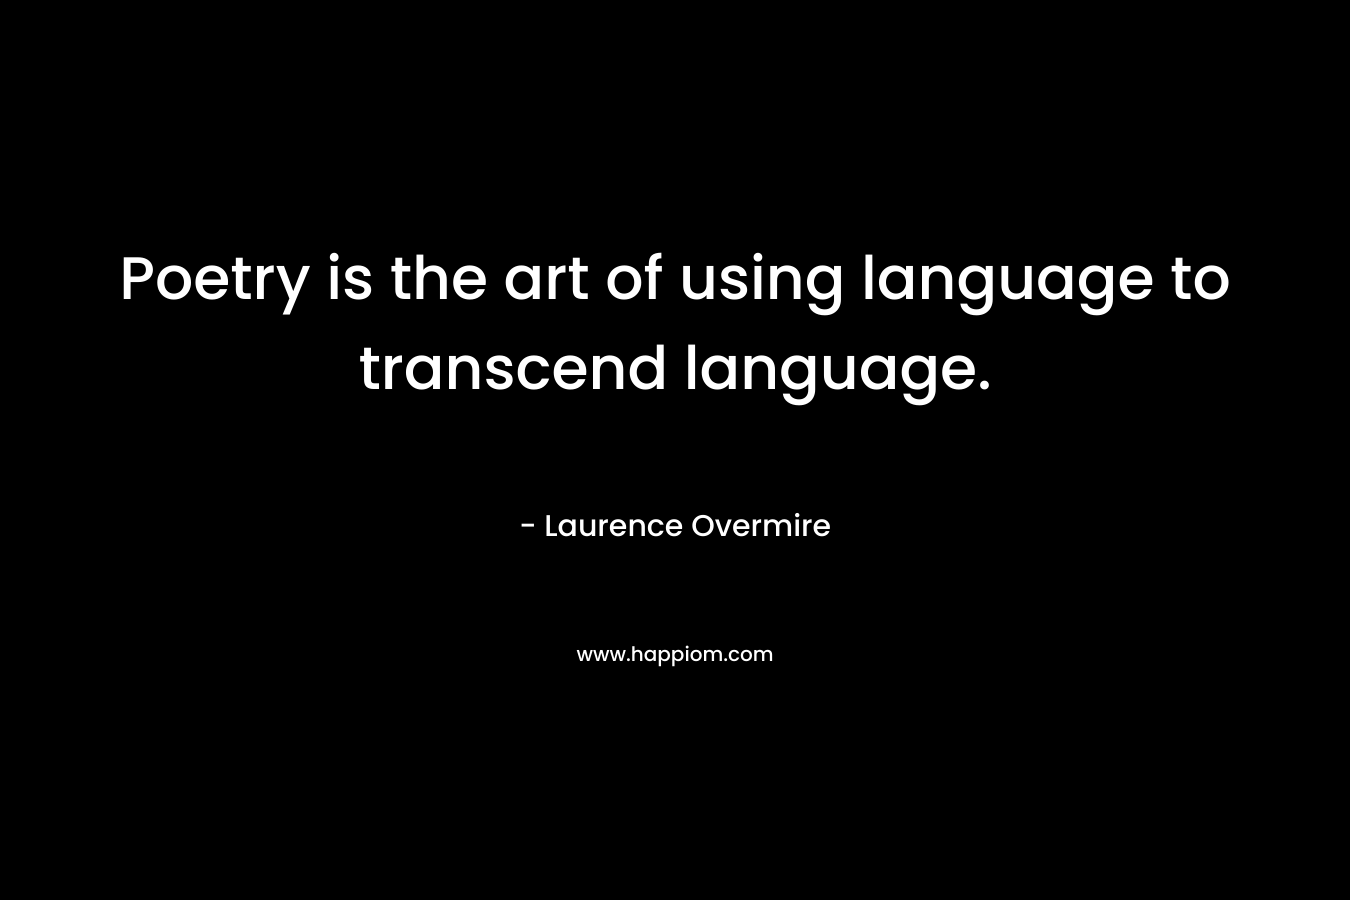 Poetry is the art of using language to transcend language. – Laurence Overmire